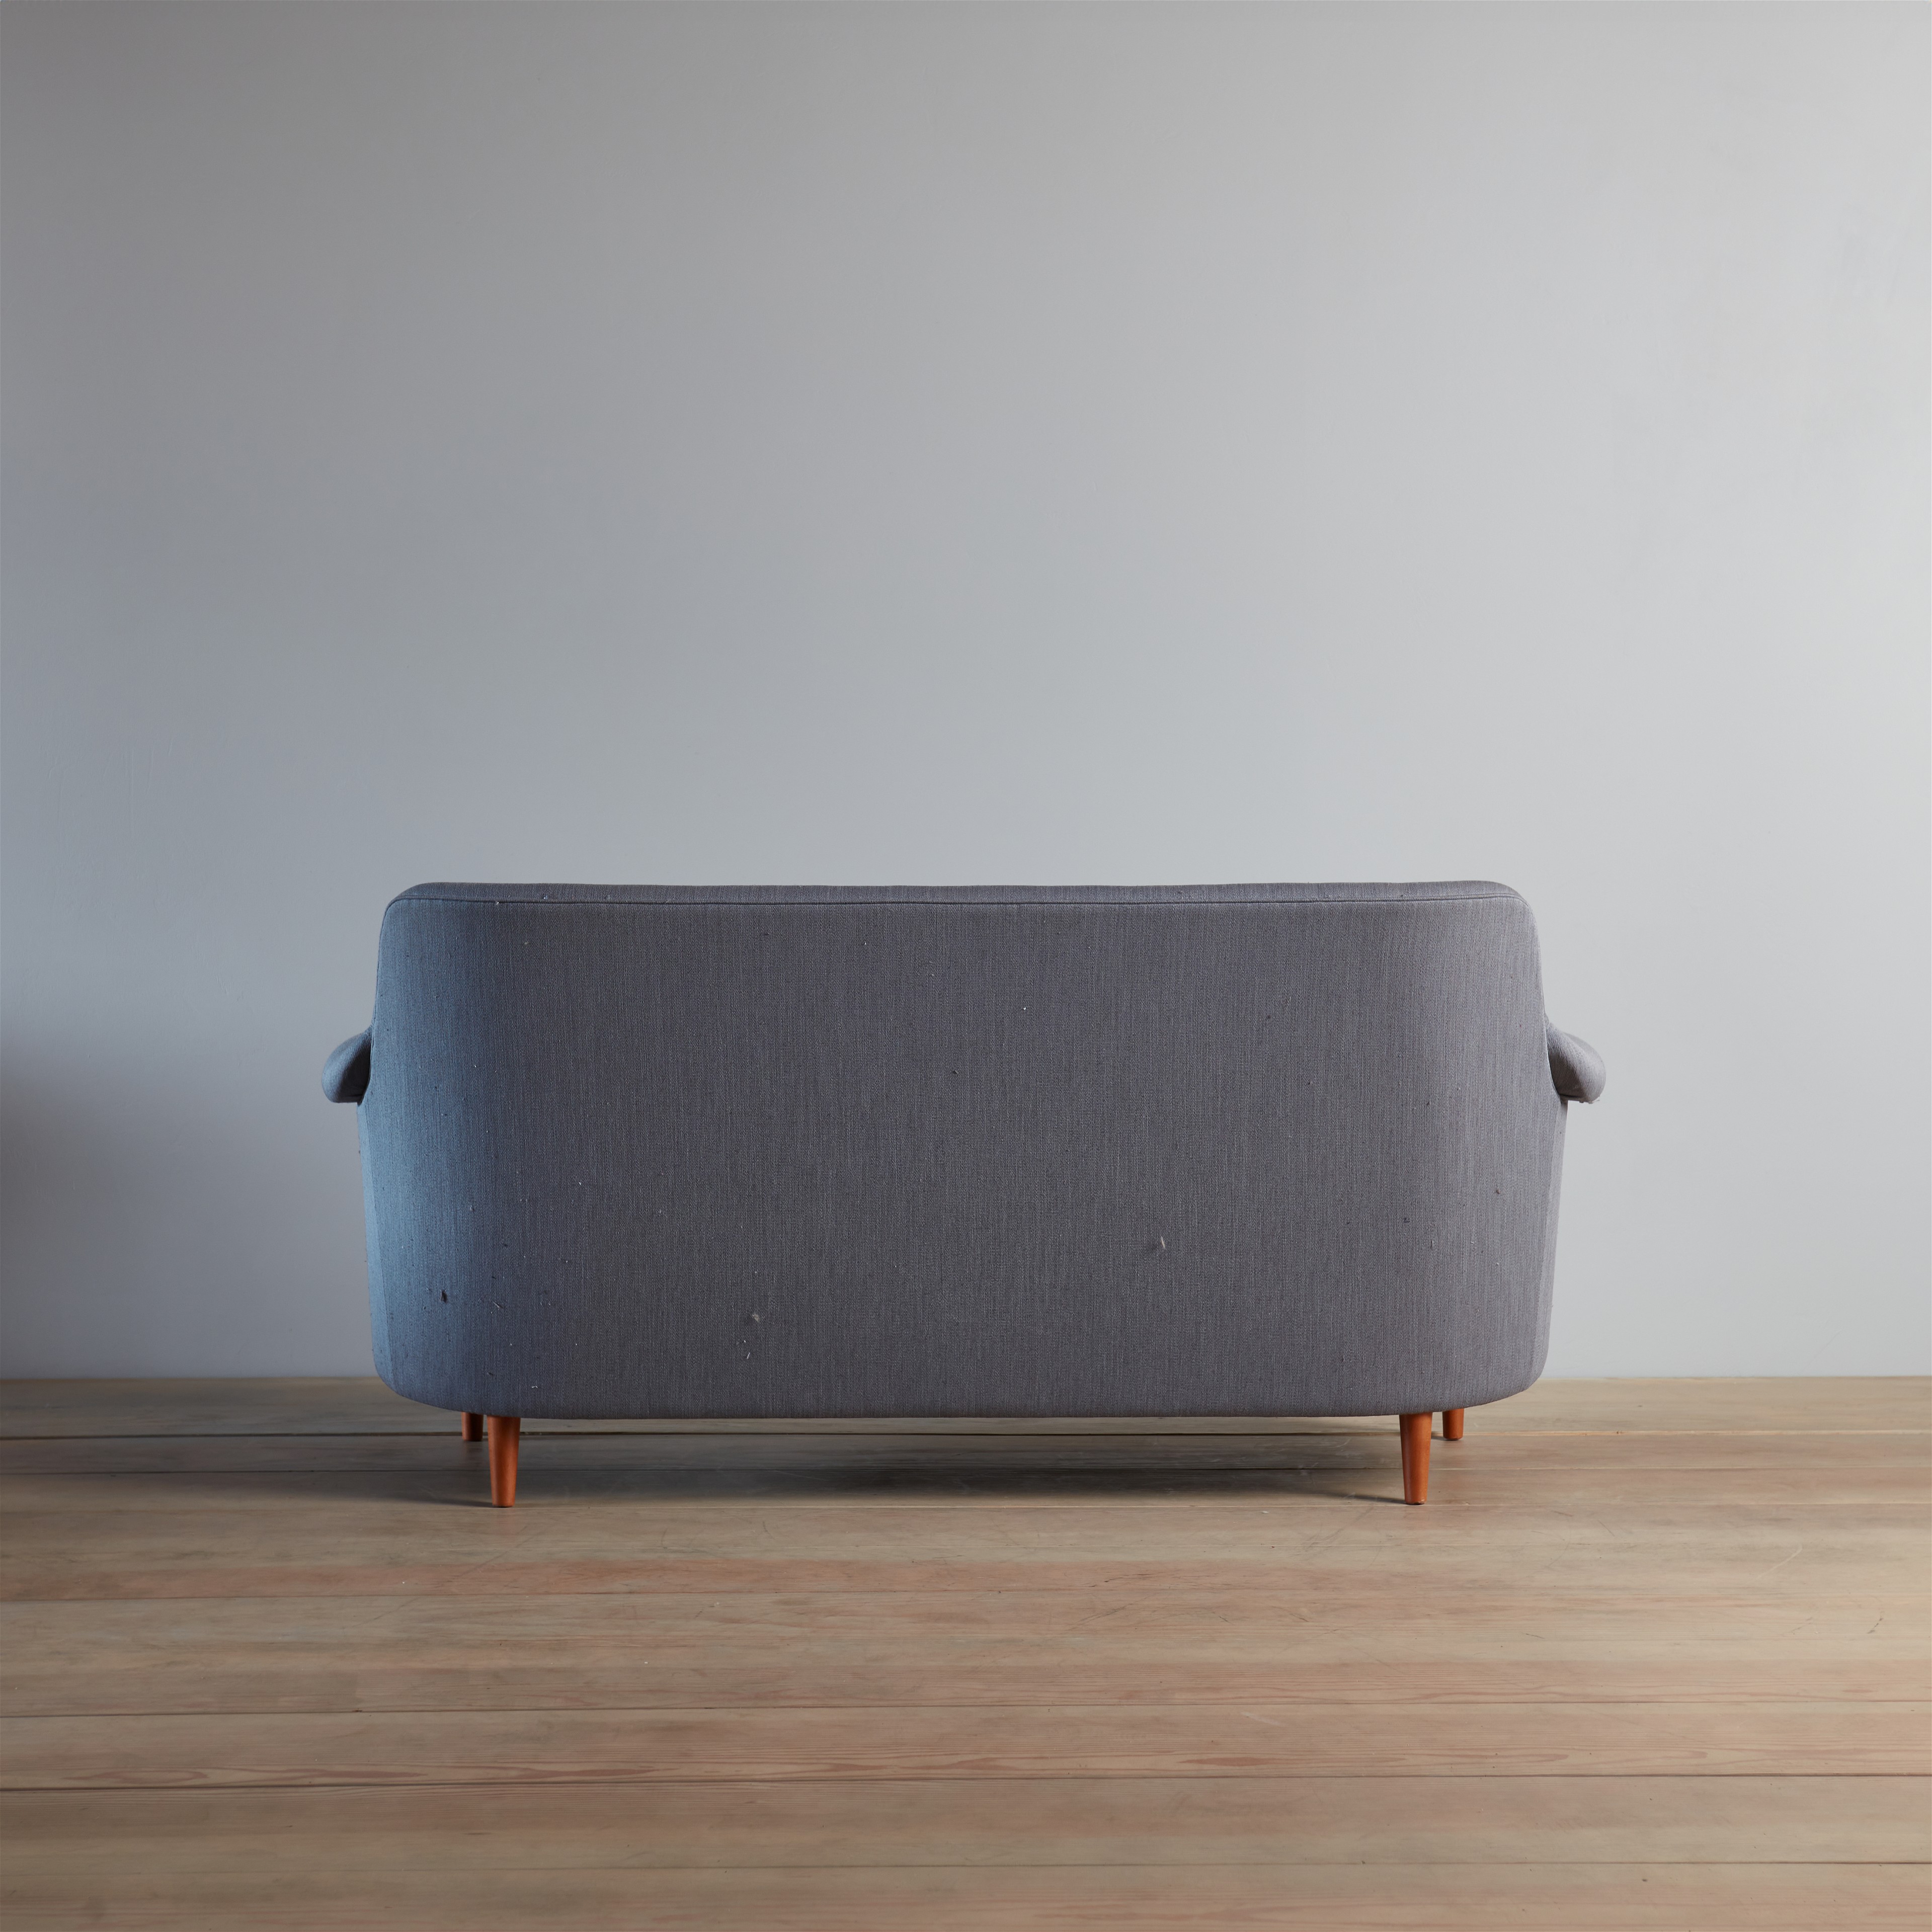 a grey couch sitting on top of a wooden floor